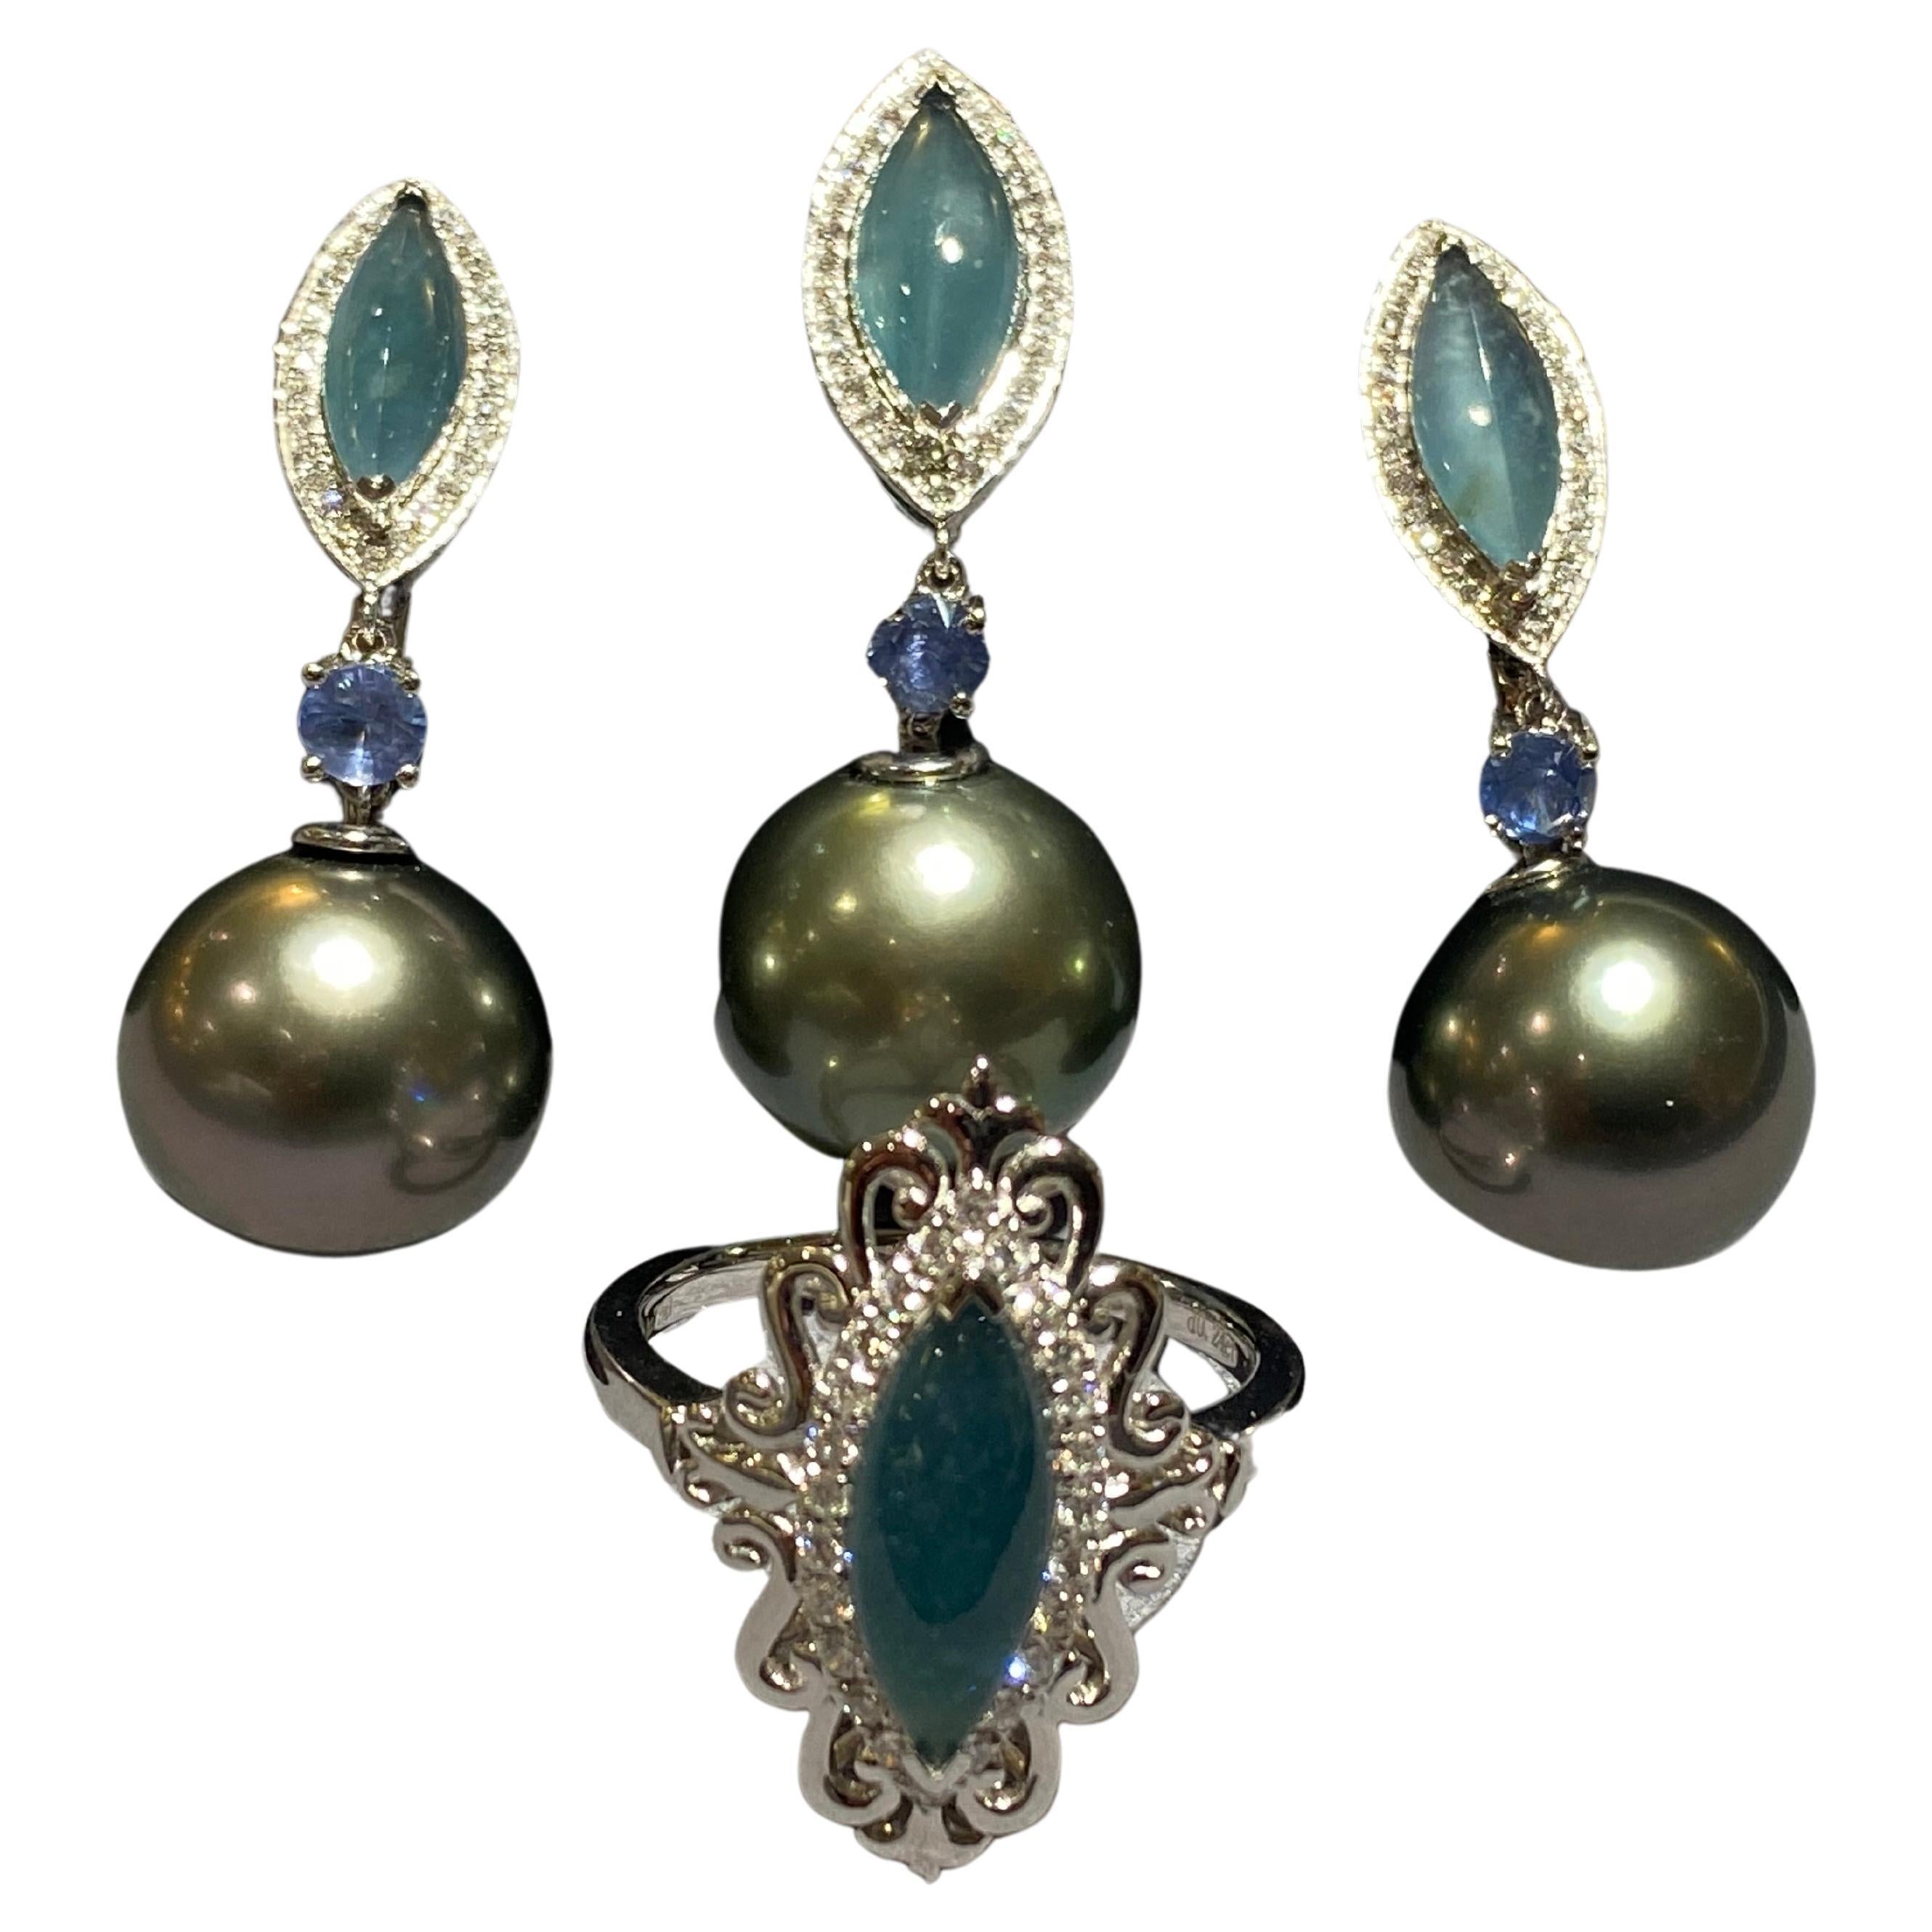 Eostre Type A Blue Jadeite, Tahitian Pearl and Diamond Jewellery set in 18k Gold